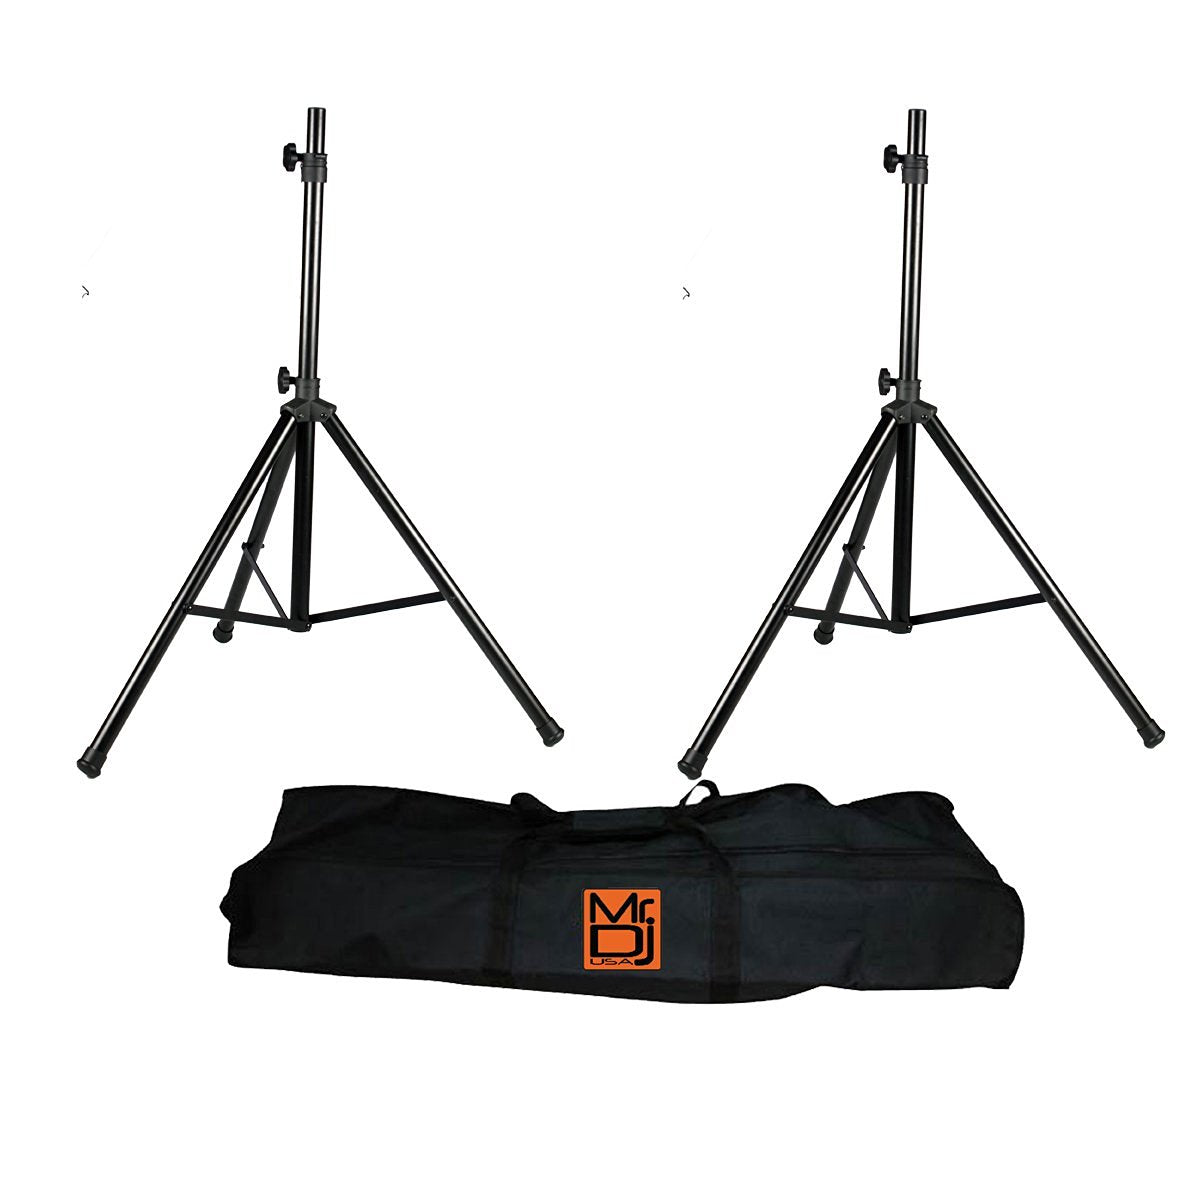 MR DJ SS650PKG Speaker Stand with Road Carrying Bag <br/> Universal Black Heavy Duty Folding Tripod PRO PA DJ Home On Stage Speaker Stand Mount Holder with Road Carrying Bag